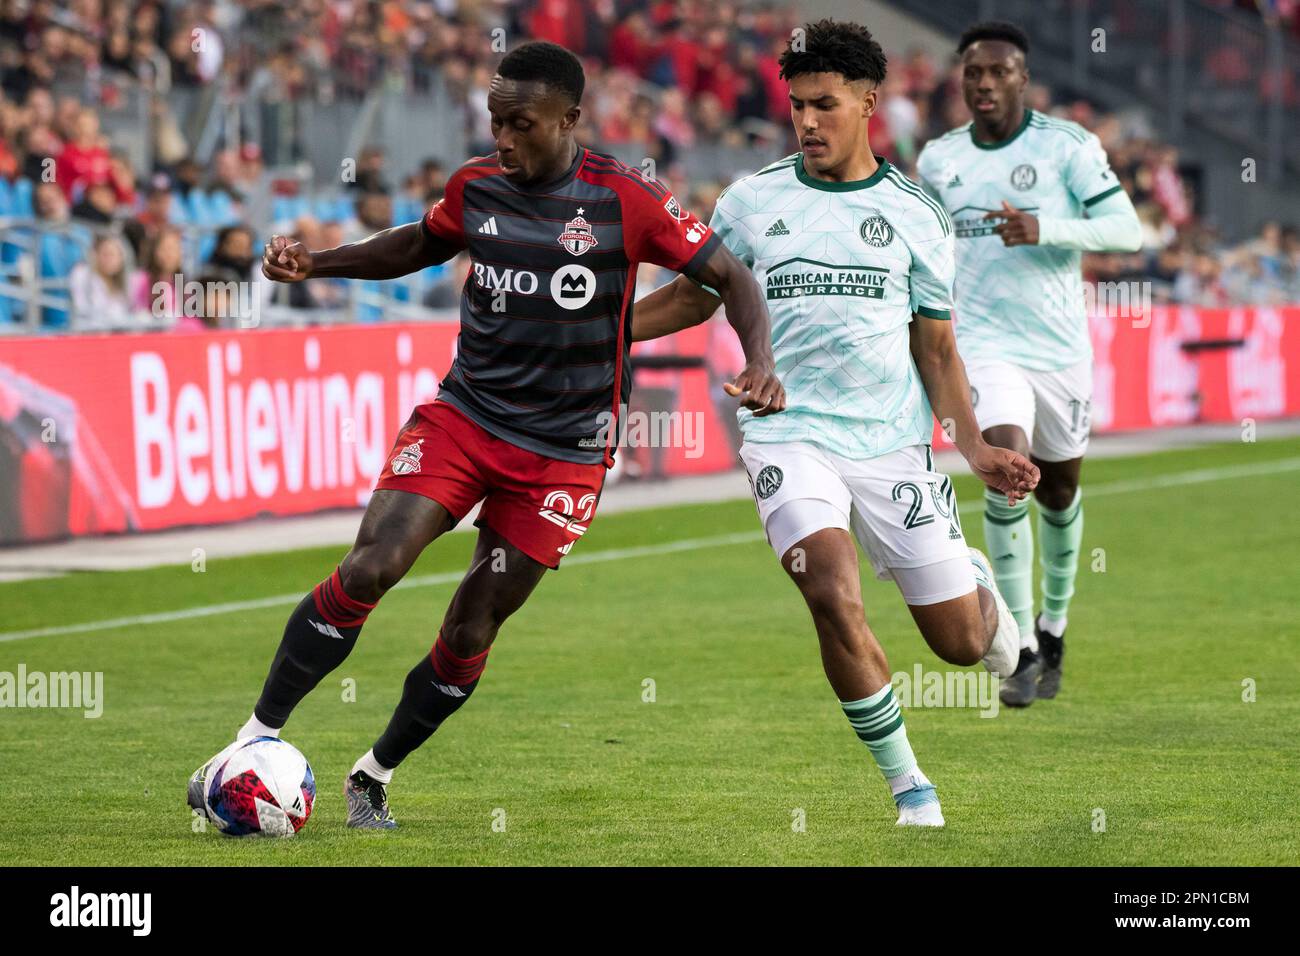 Toronto, Canada. 15th Apr, 2023. Richie Laryea #22 (L) and Caleb Wiley #26 (R) in action during the MLS game between Toronto FC and Atlanta United at BMO field. The game ended 2-2. (Photo by Angel Marchini/SOPA Images/Sipa USA) Credit: Sipa USA/Alamy Live News Stock Photo